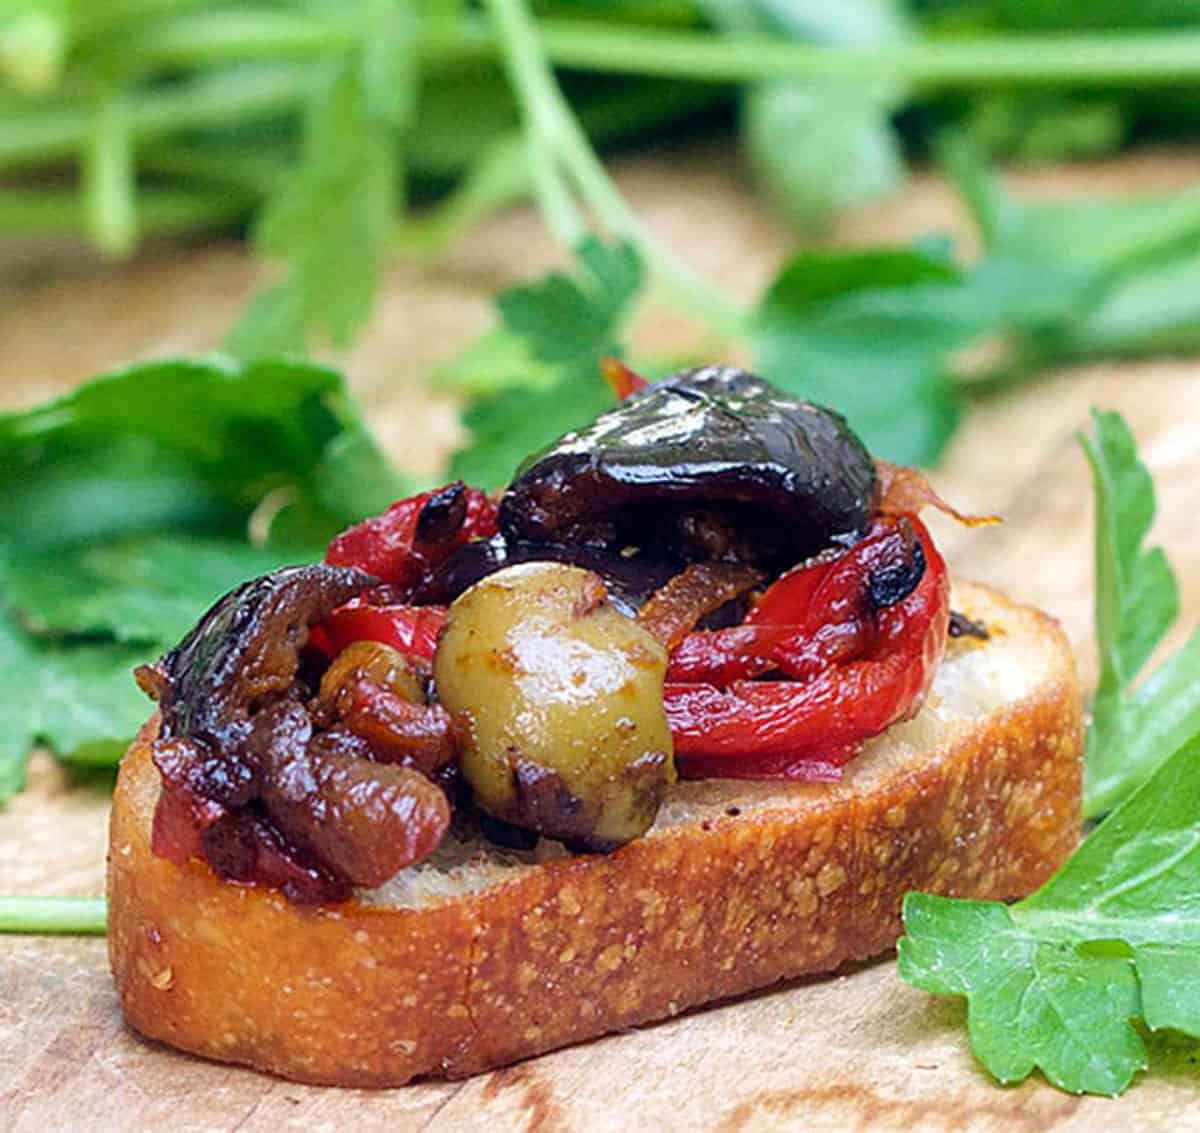 sweet and sour stewed chopped eggplant, olives, peppers and raisins on a toasted baguette slice.